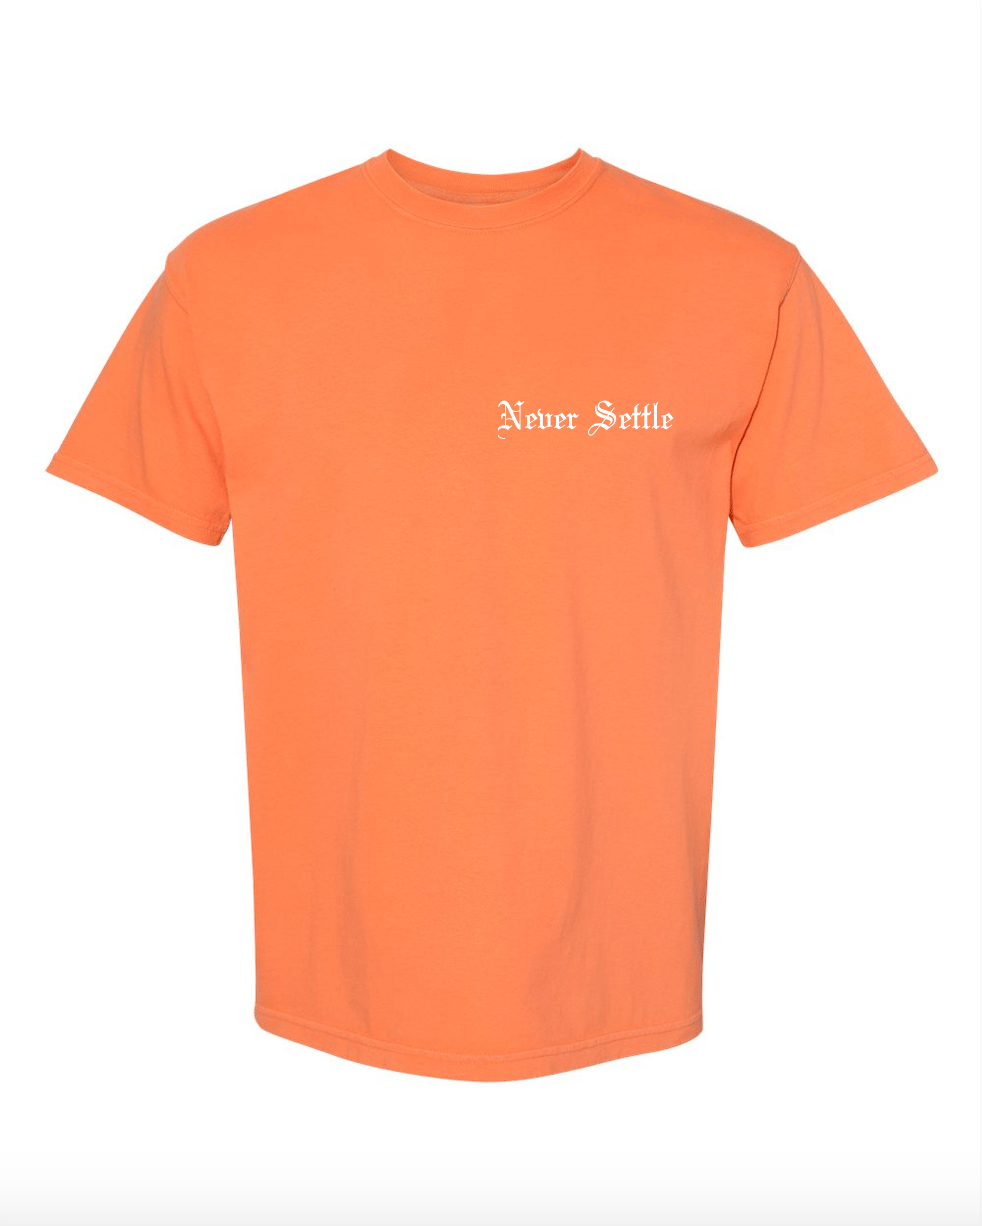 Image of MANGO - Price Is Up "Never Settle" Tee